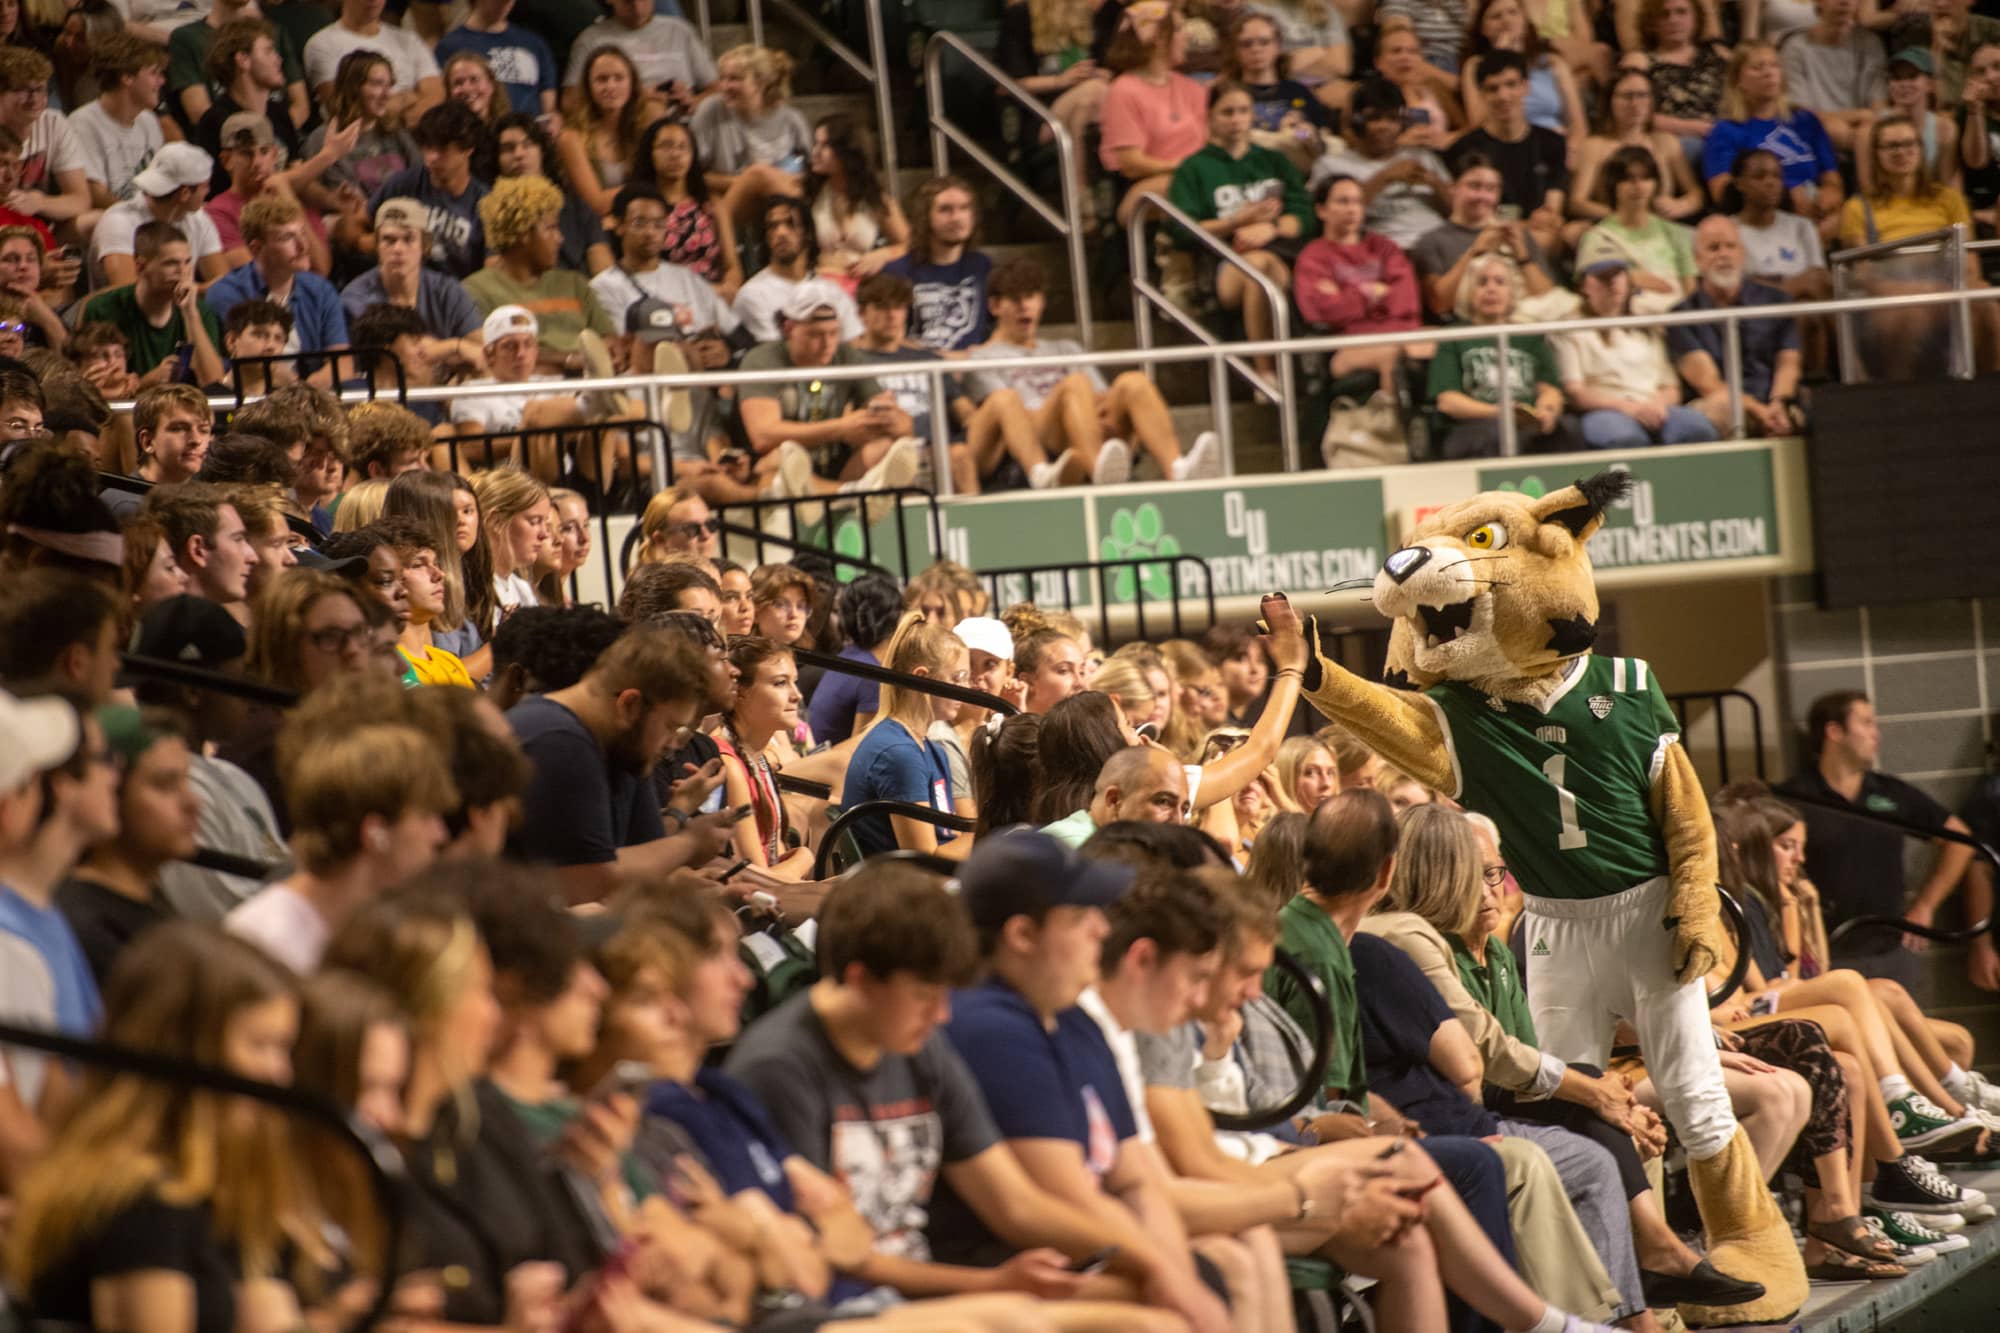 Rufus high fives a student at the First Year Student Convocation.